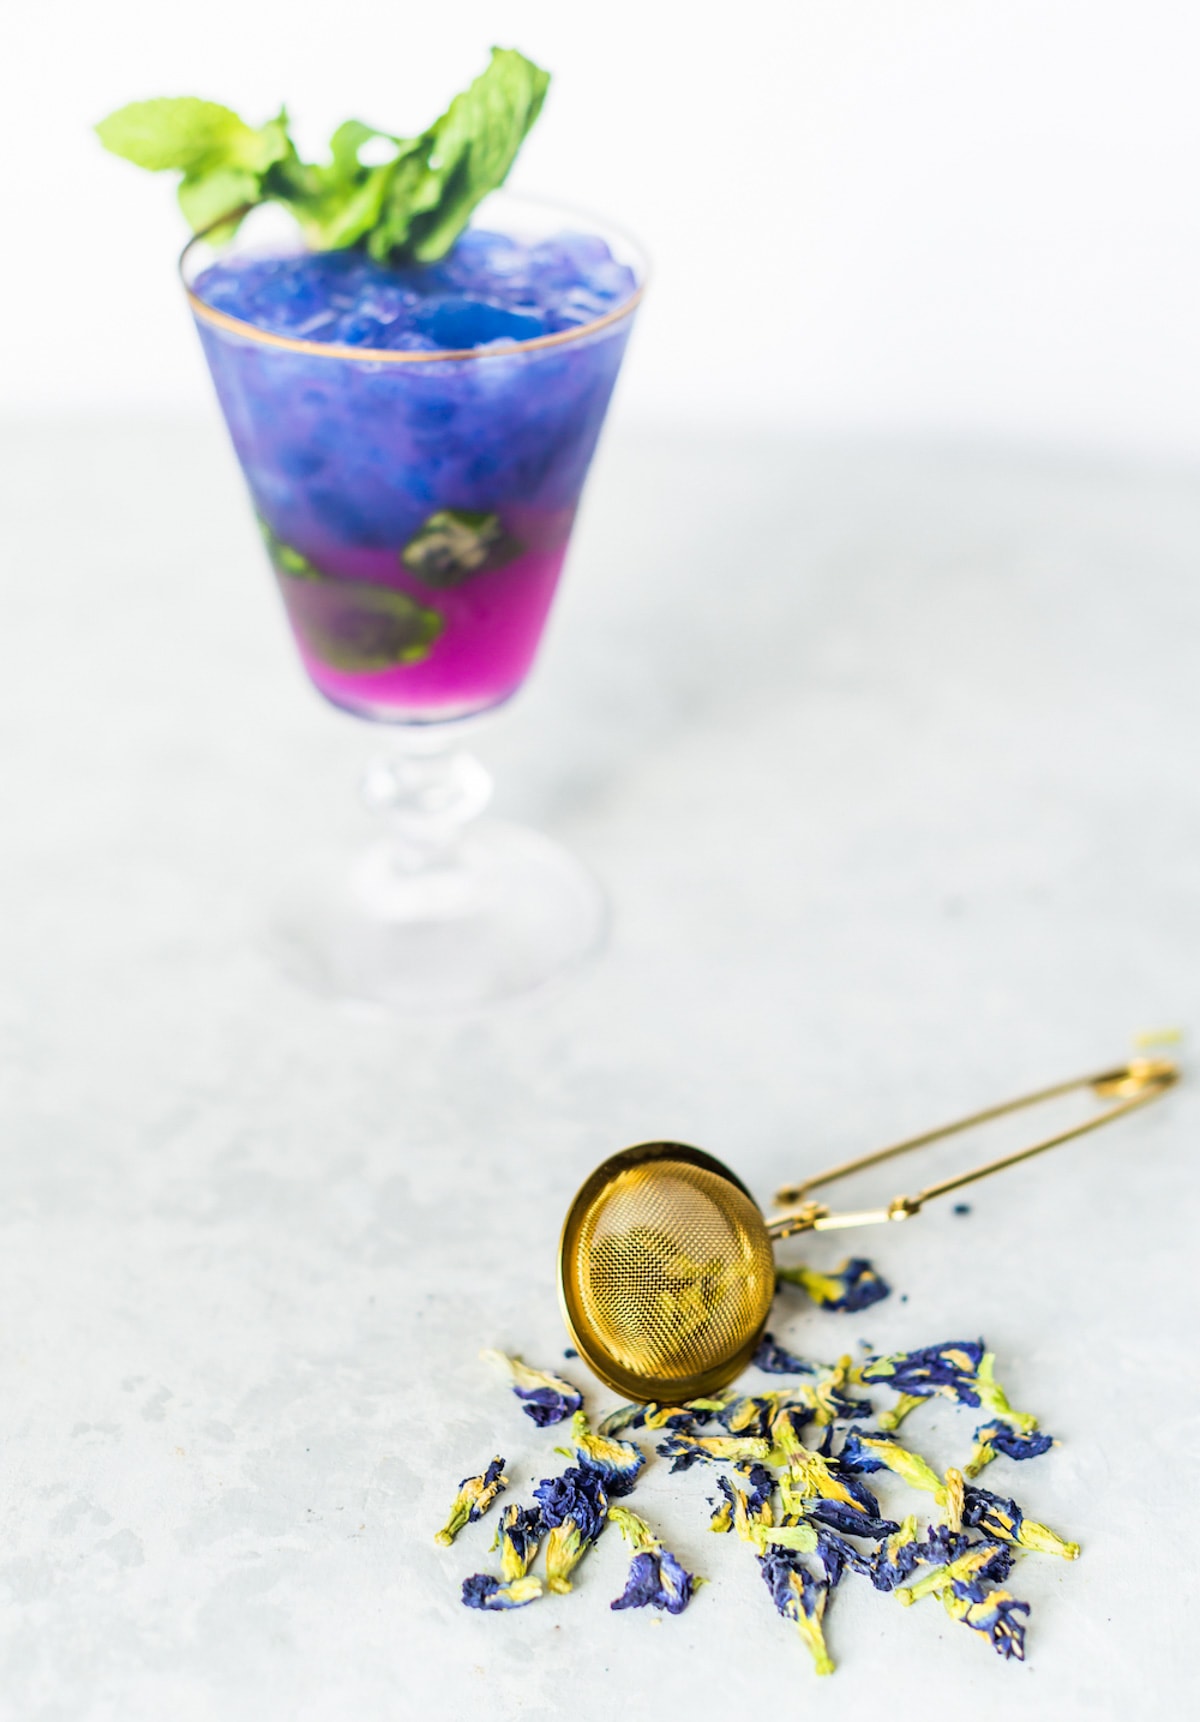 photo of the Butterfly Pea Flower Tea leaves by top Houston lifestyle blogger Ashley Rose of Sugar & Cloth